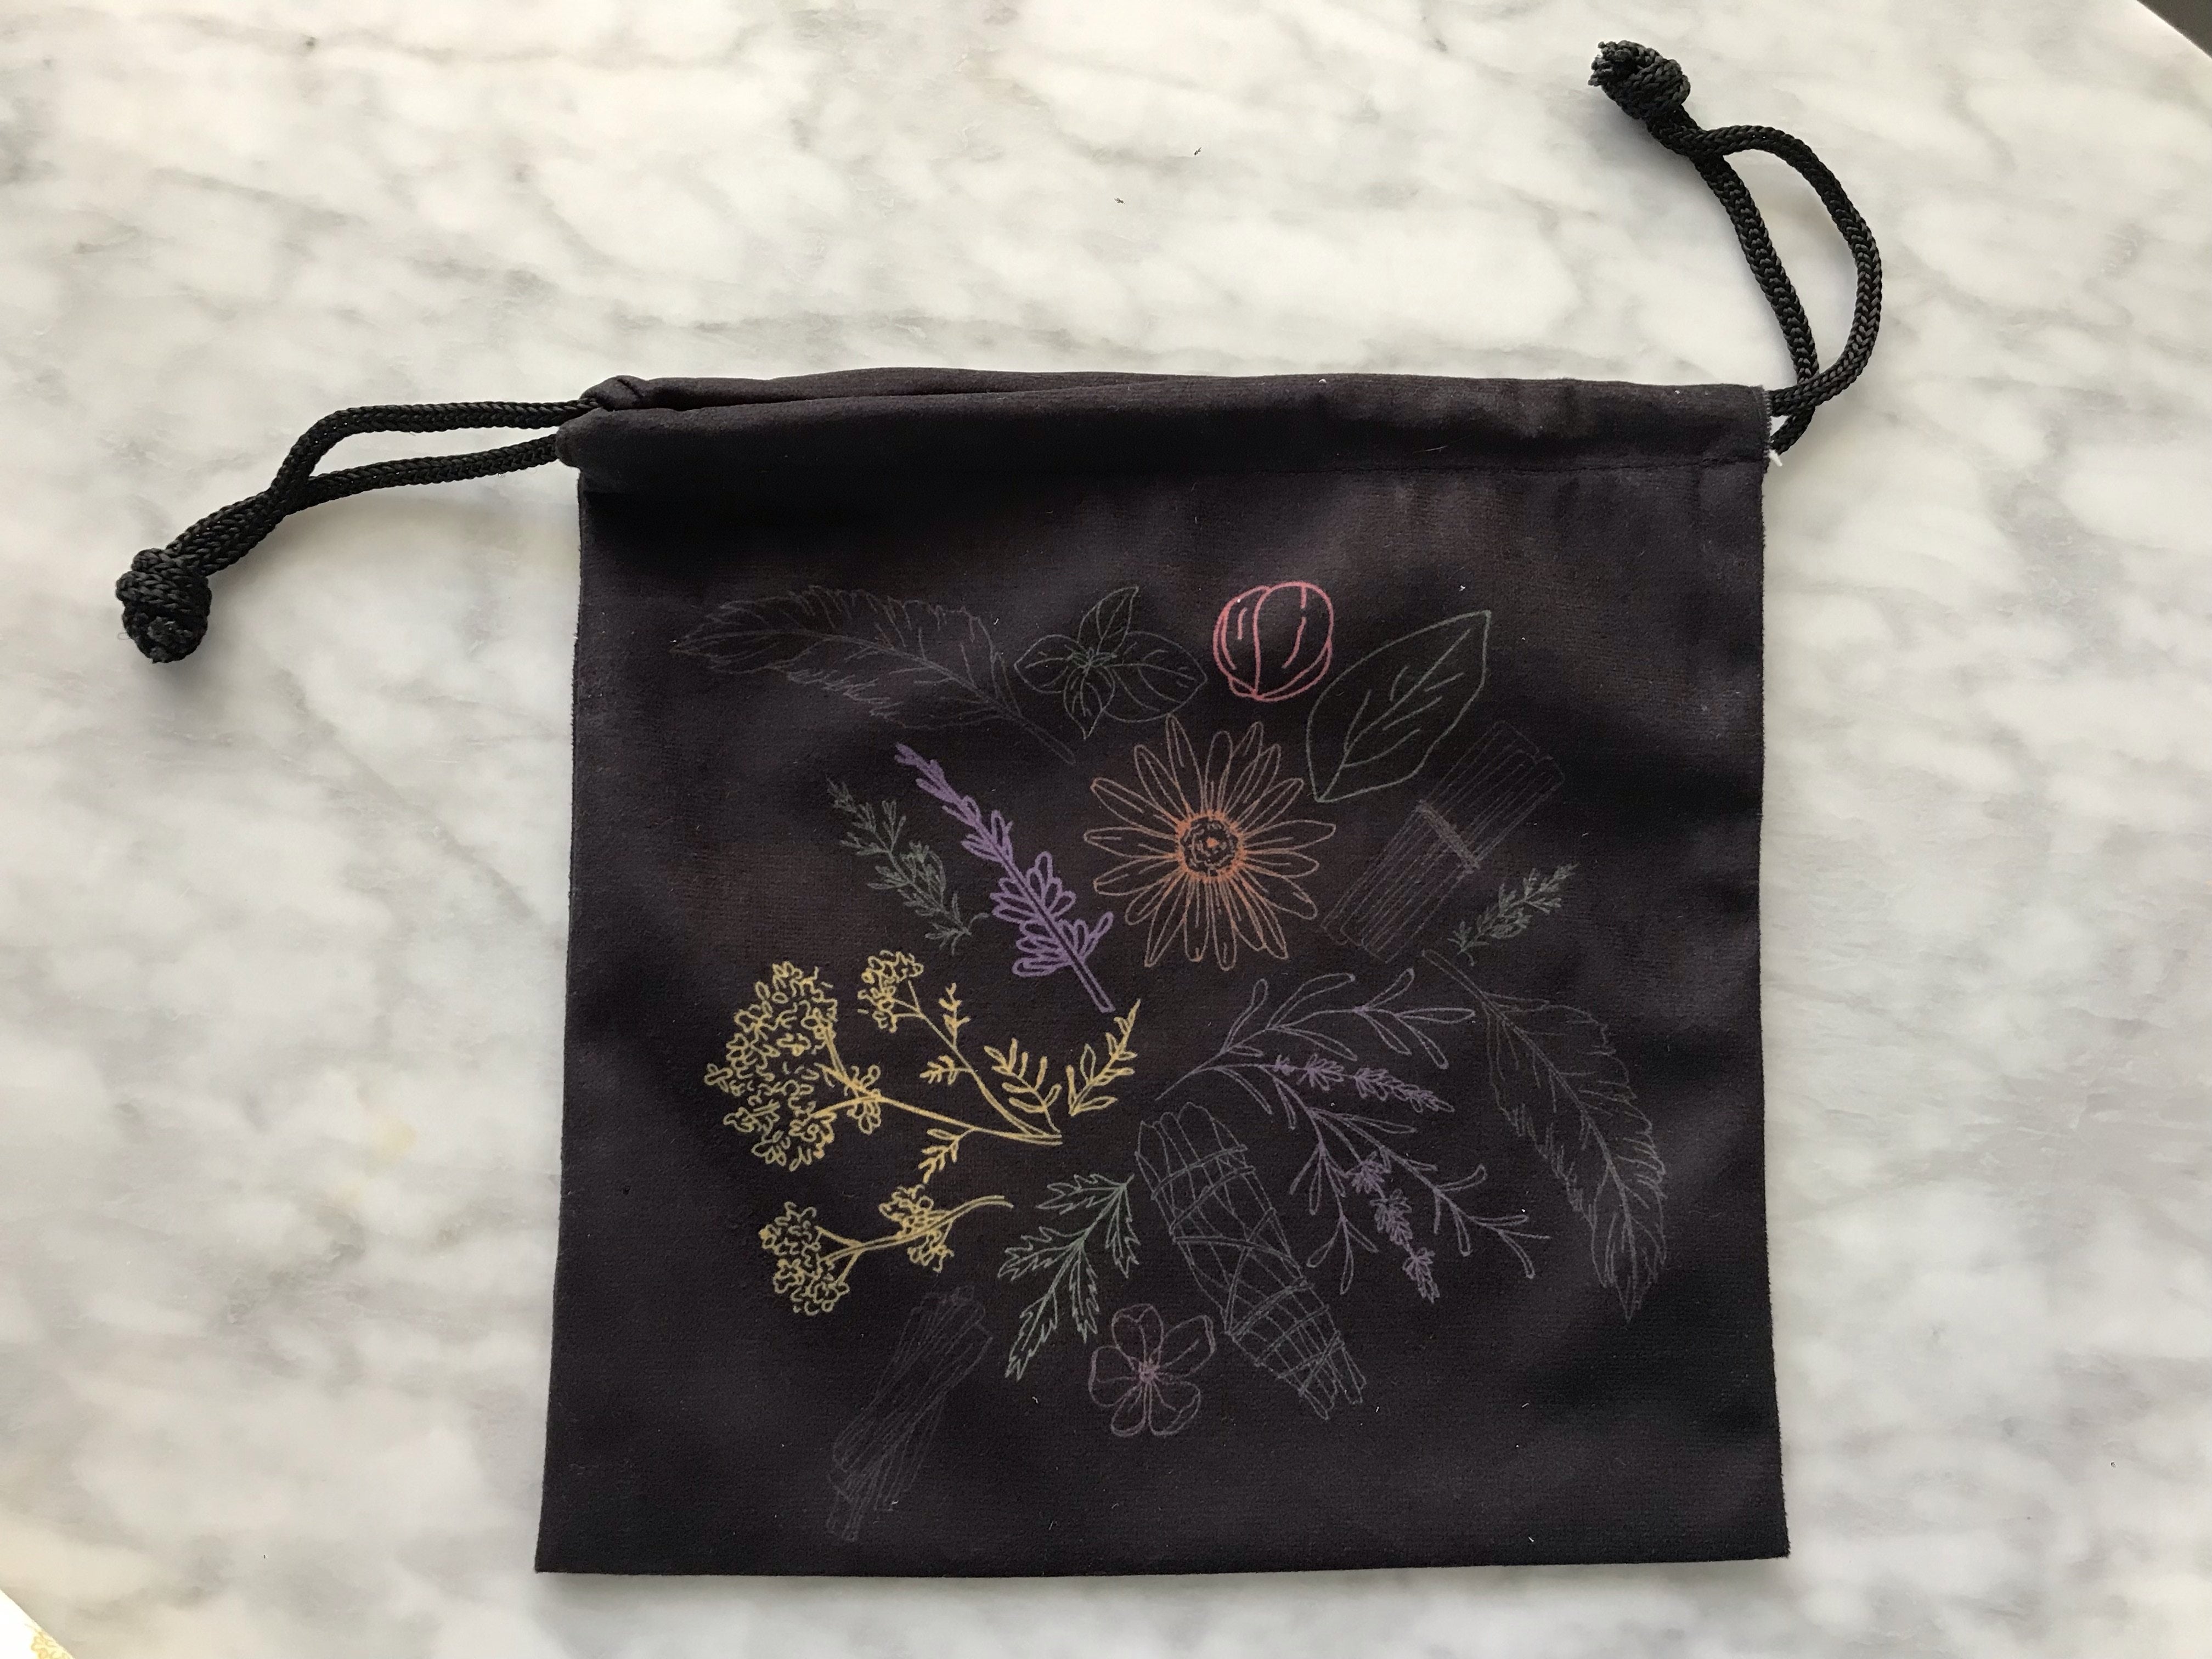 Velvet bag, LARGE: Kitchen Witch, large 9.5 inches x 9.5 inches